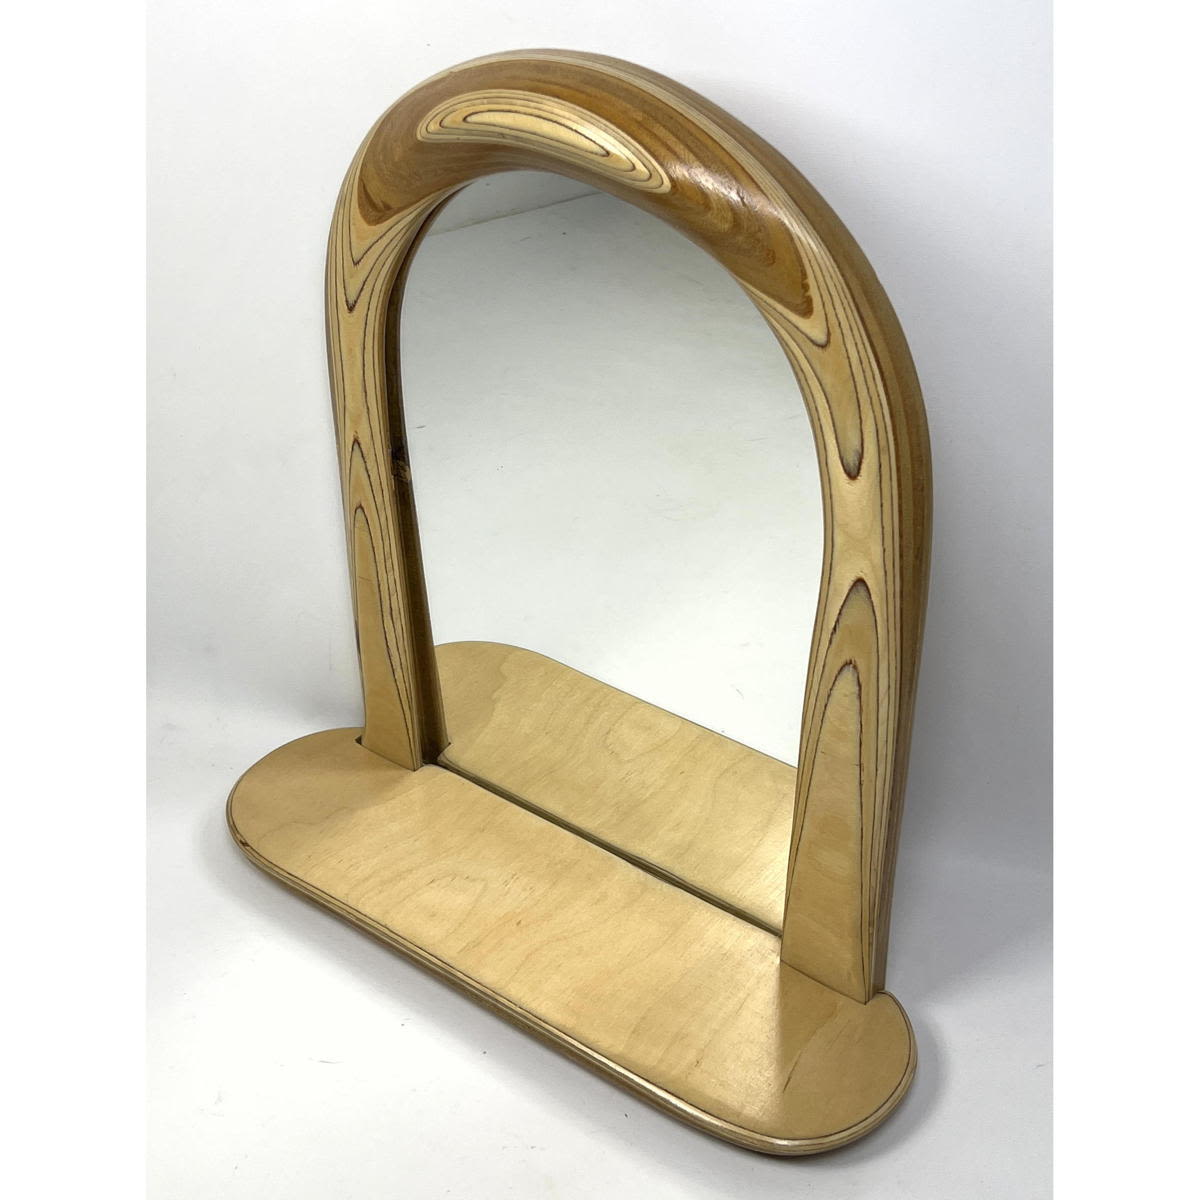 R HARGRAVE Laminated Wood Arched